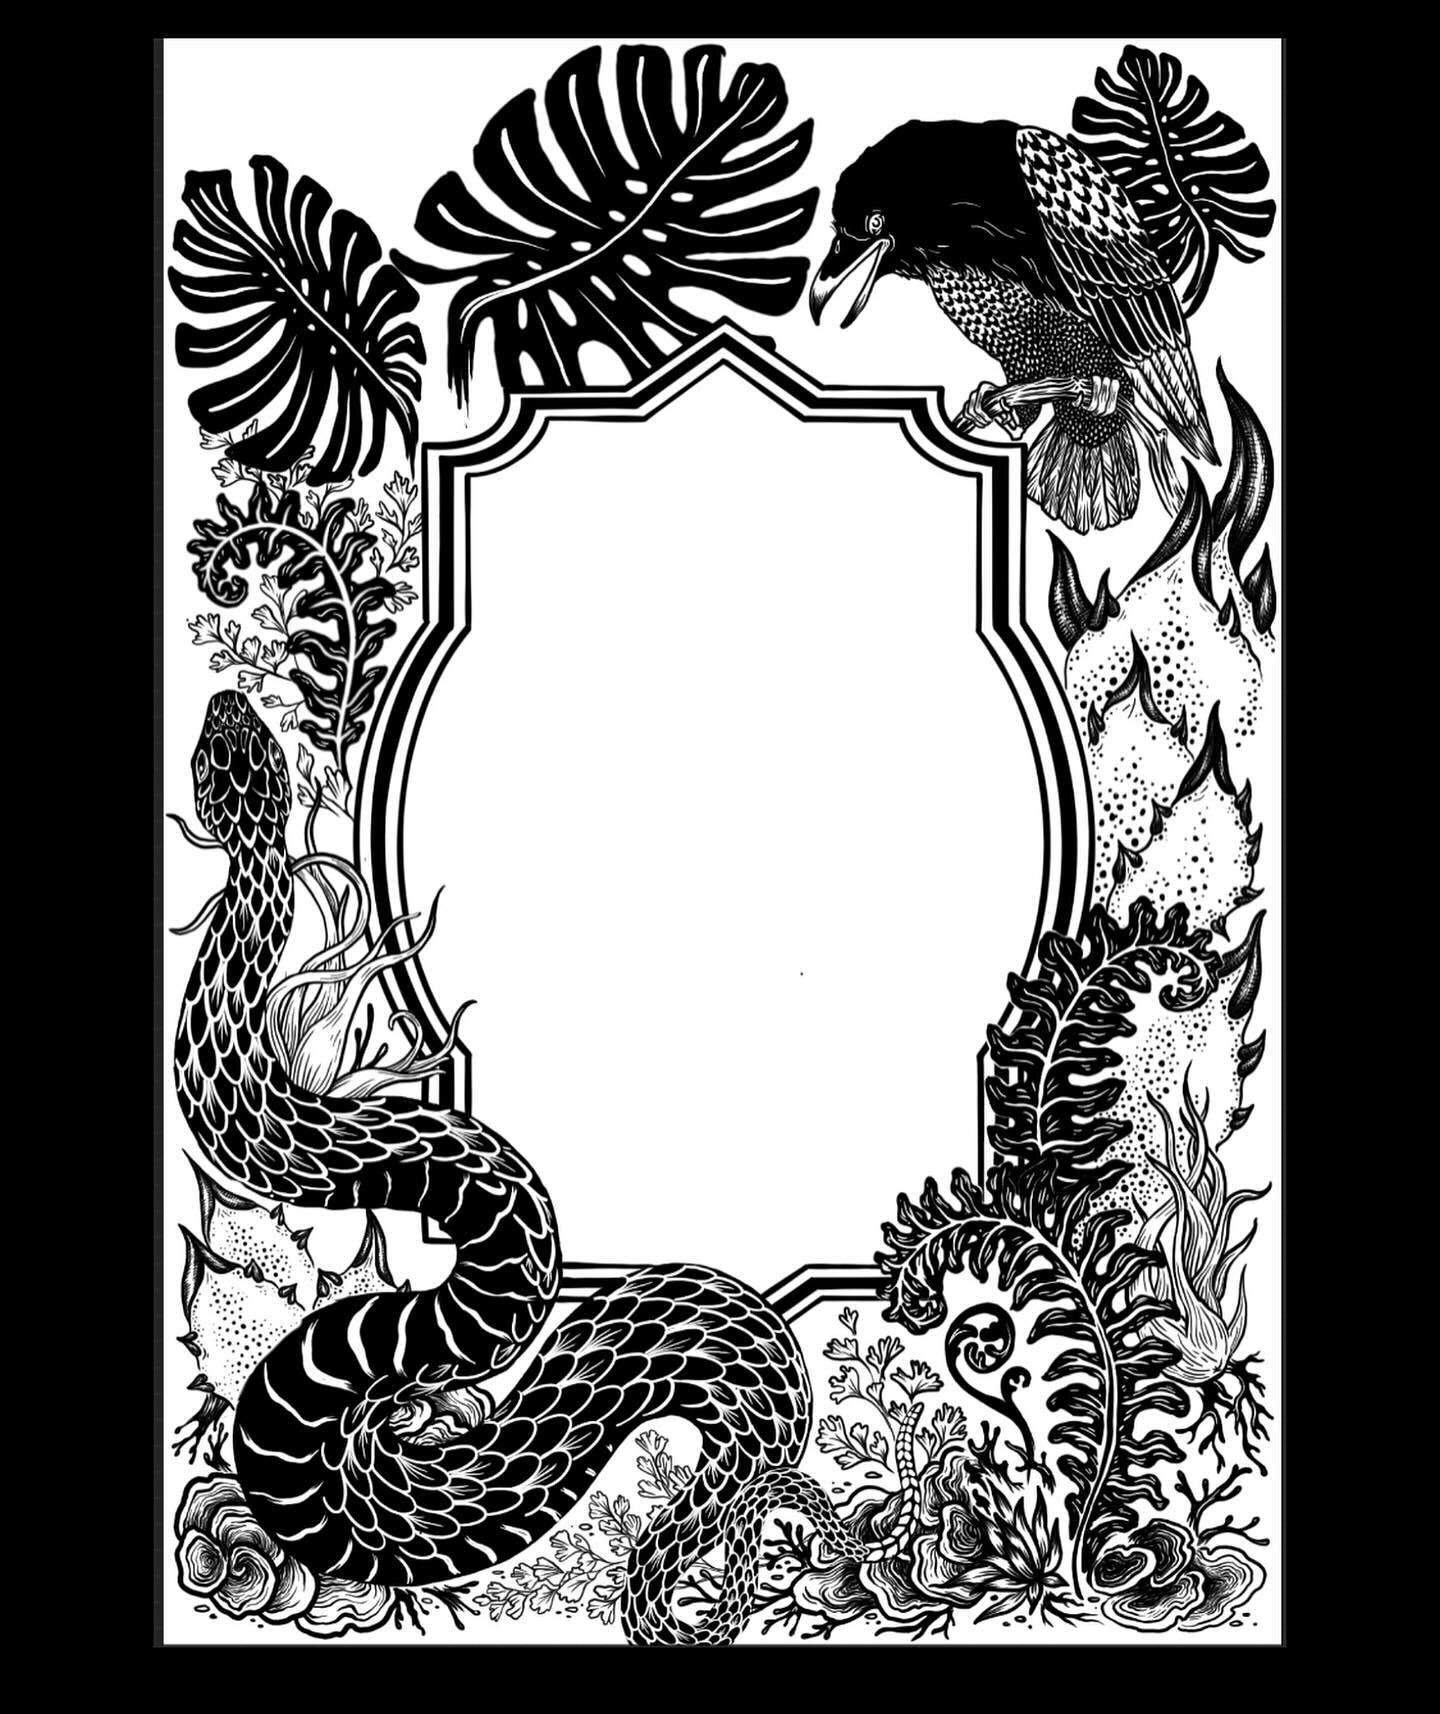 Making art for my dear friends Melissa &amp; Cale&rsquo;s wedding invitation was such a joy, and I got to draw all of my favorite things. The theme was Oaxacan flora &amp; fauna, so you may spy a black rattlesnake, a crow, air plants, agaves, ferns, 